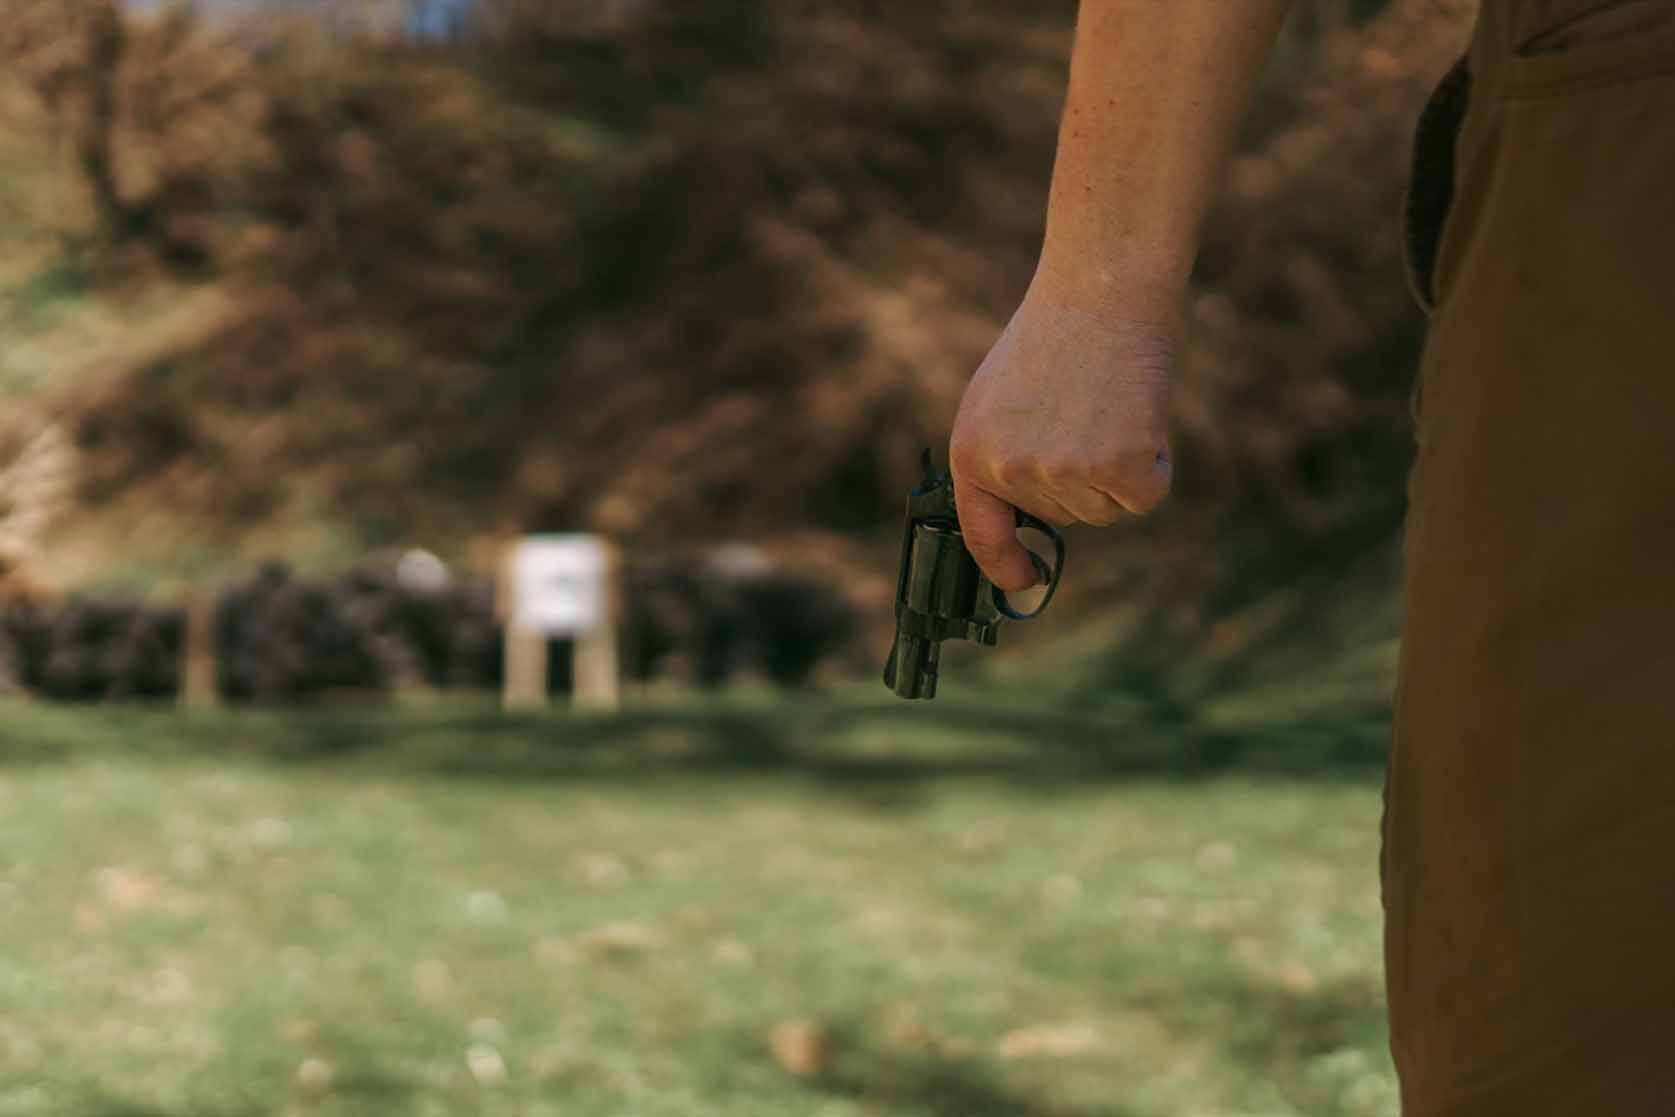 A male gun enthusiast holds a revolver, ready to aim at a distant target on an outdoor shooting range; identity obscured.